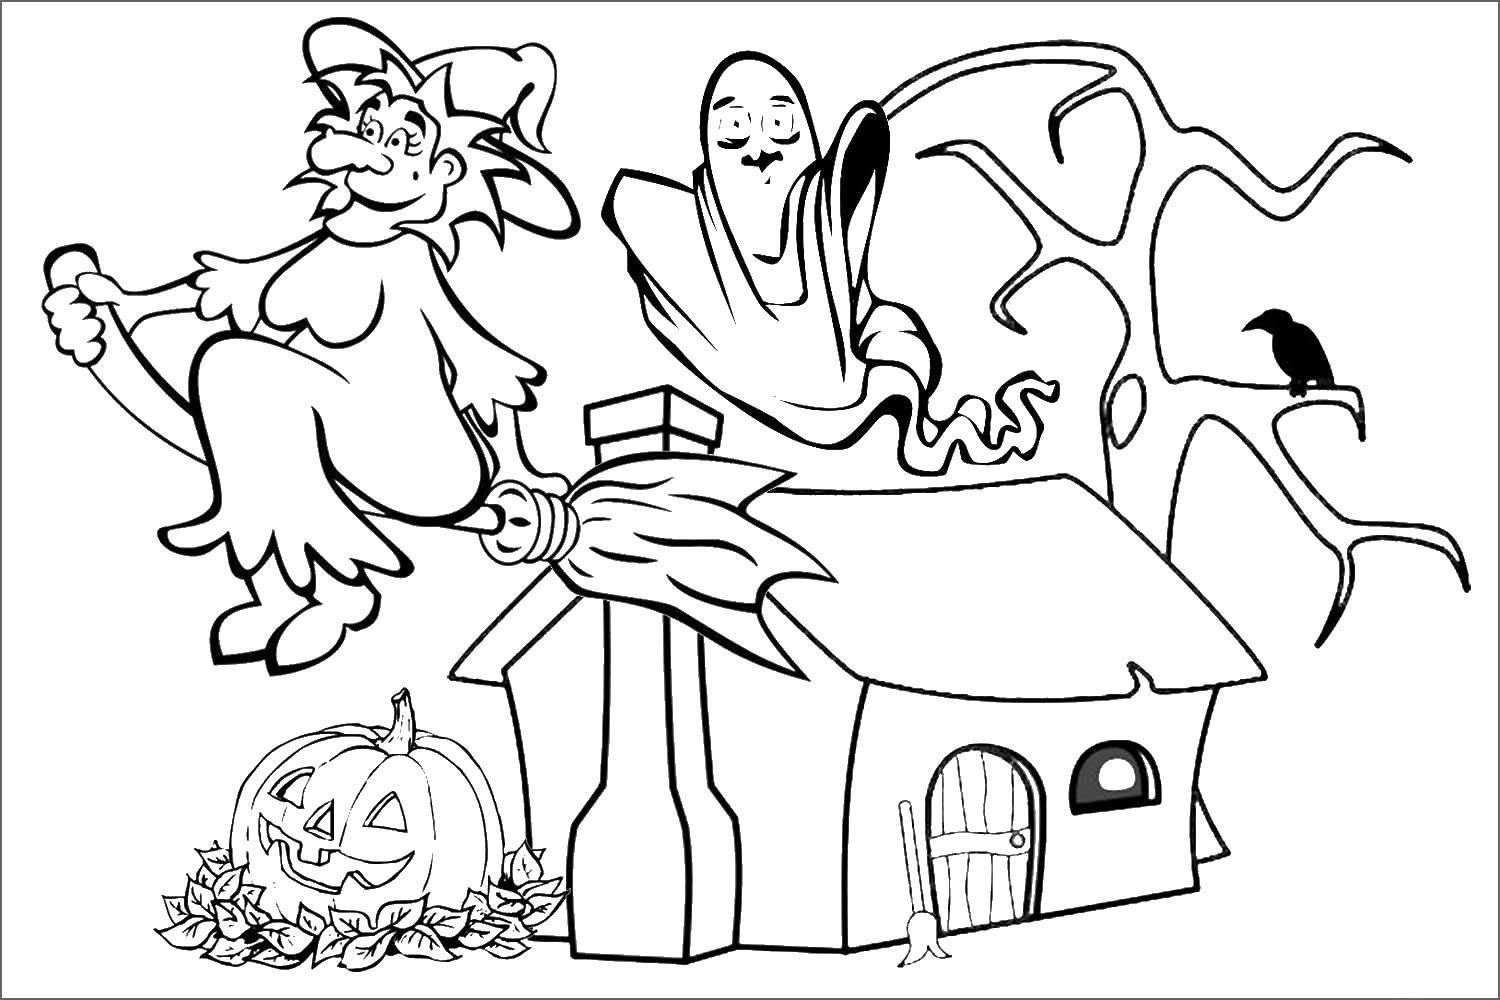 Coloring Witch, Ghost, pumpkin. Category Halloween. Tags:  Halloween, witch, Ghost, pumpkin.